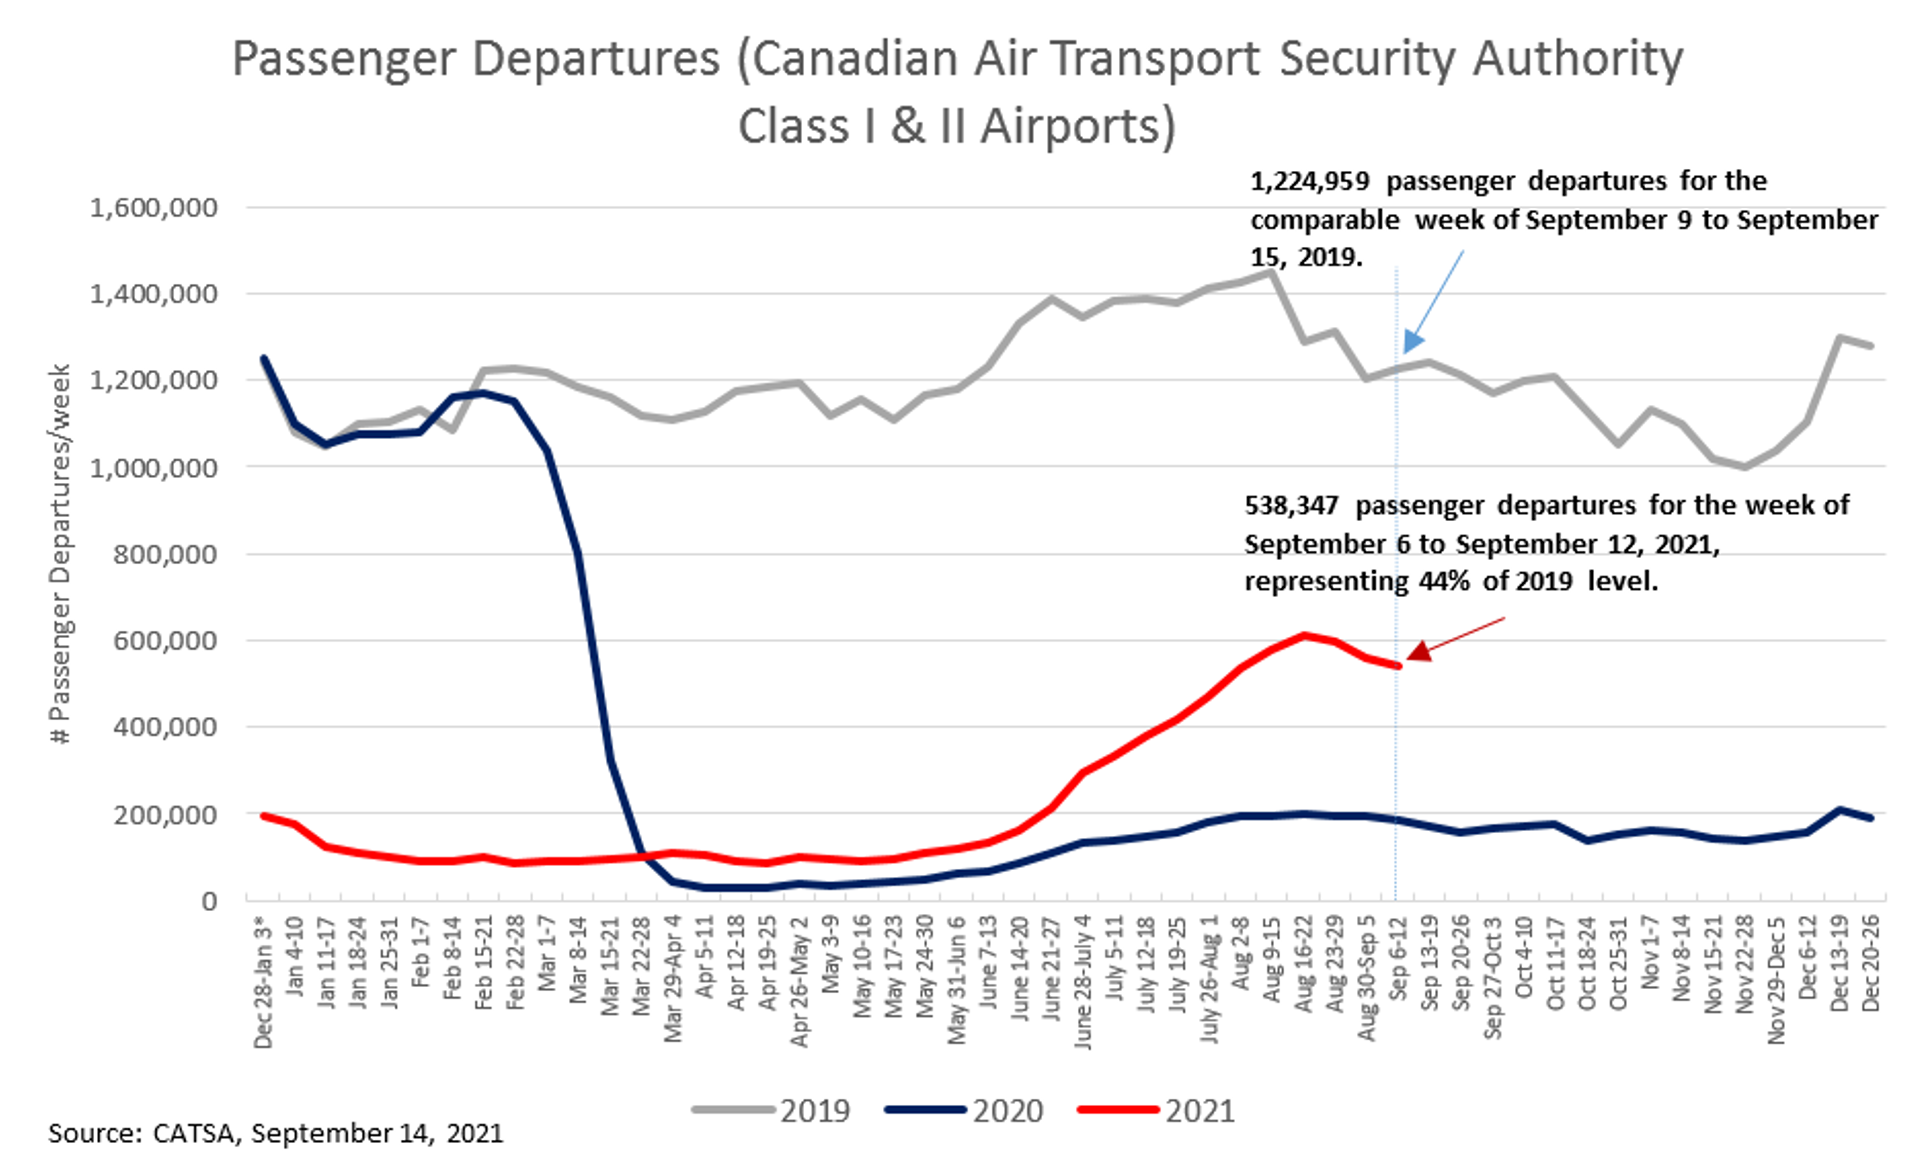 Passenger Departures (Canadian Air Transport Security Authority Class I & II Airports)